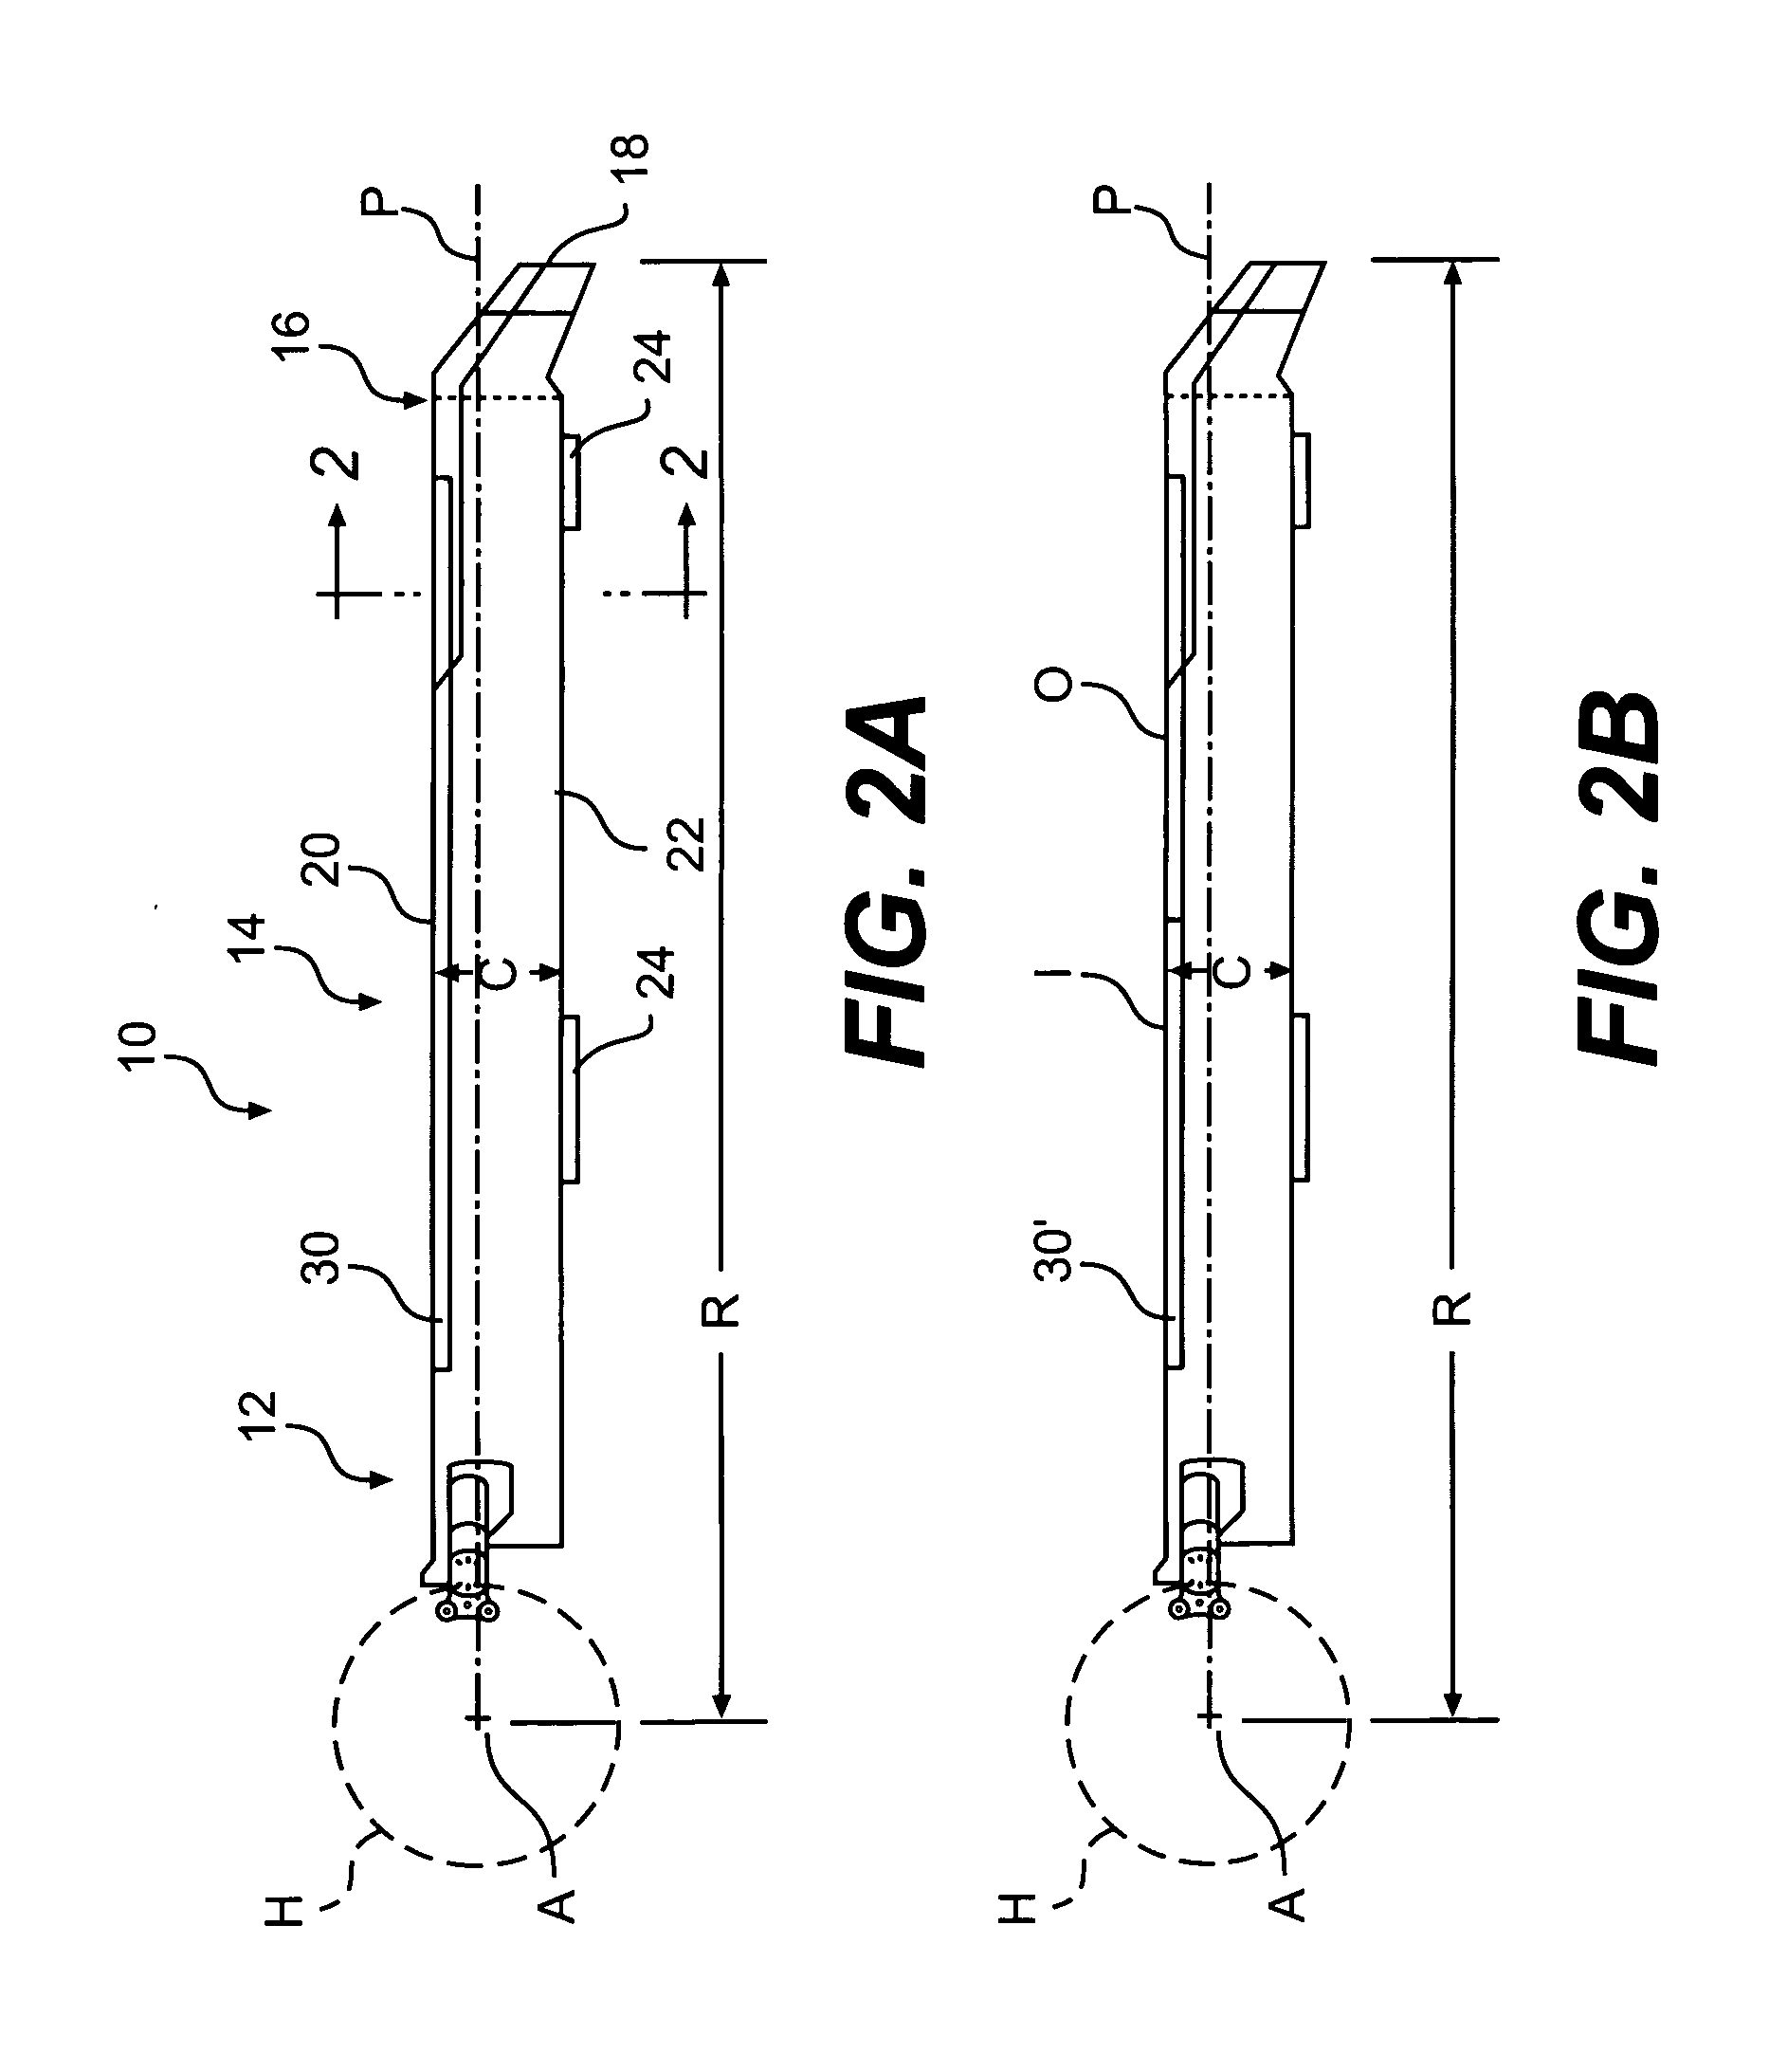 Dual-channel deicing system for a rotary wing aircraft